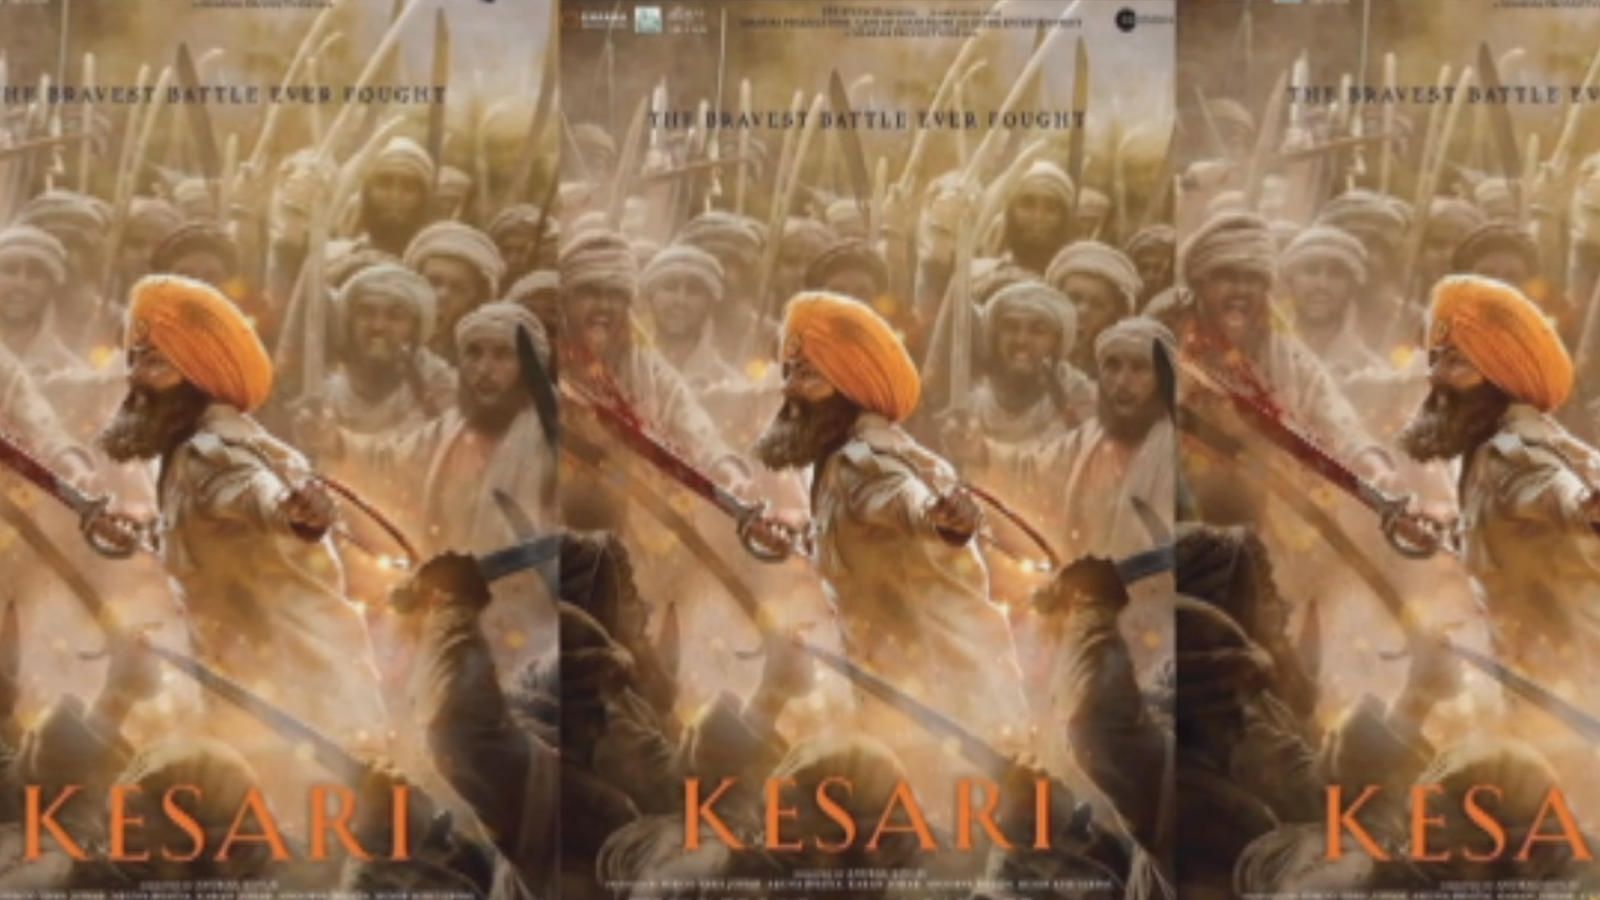 Kesari' box office collection Day 9: The Akshay Kumar starrer holds strong on its second Friday. Hindi Movie News of India